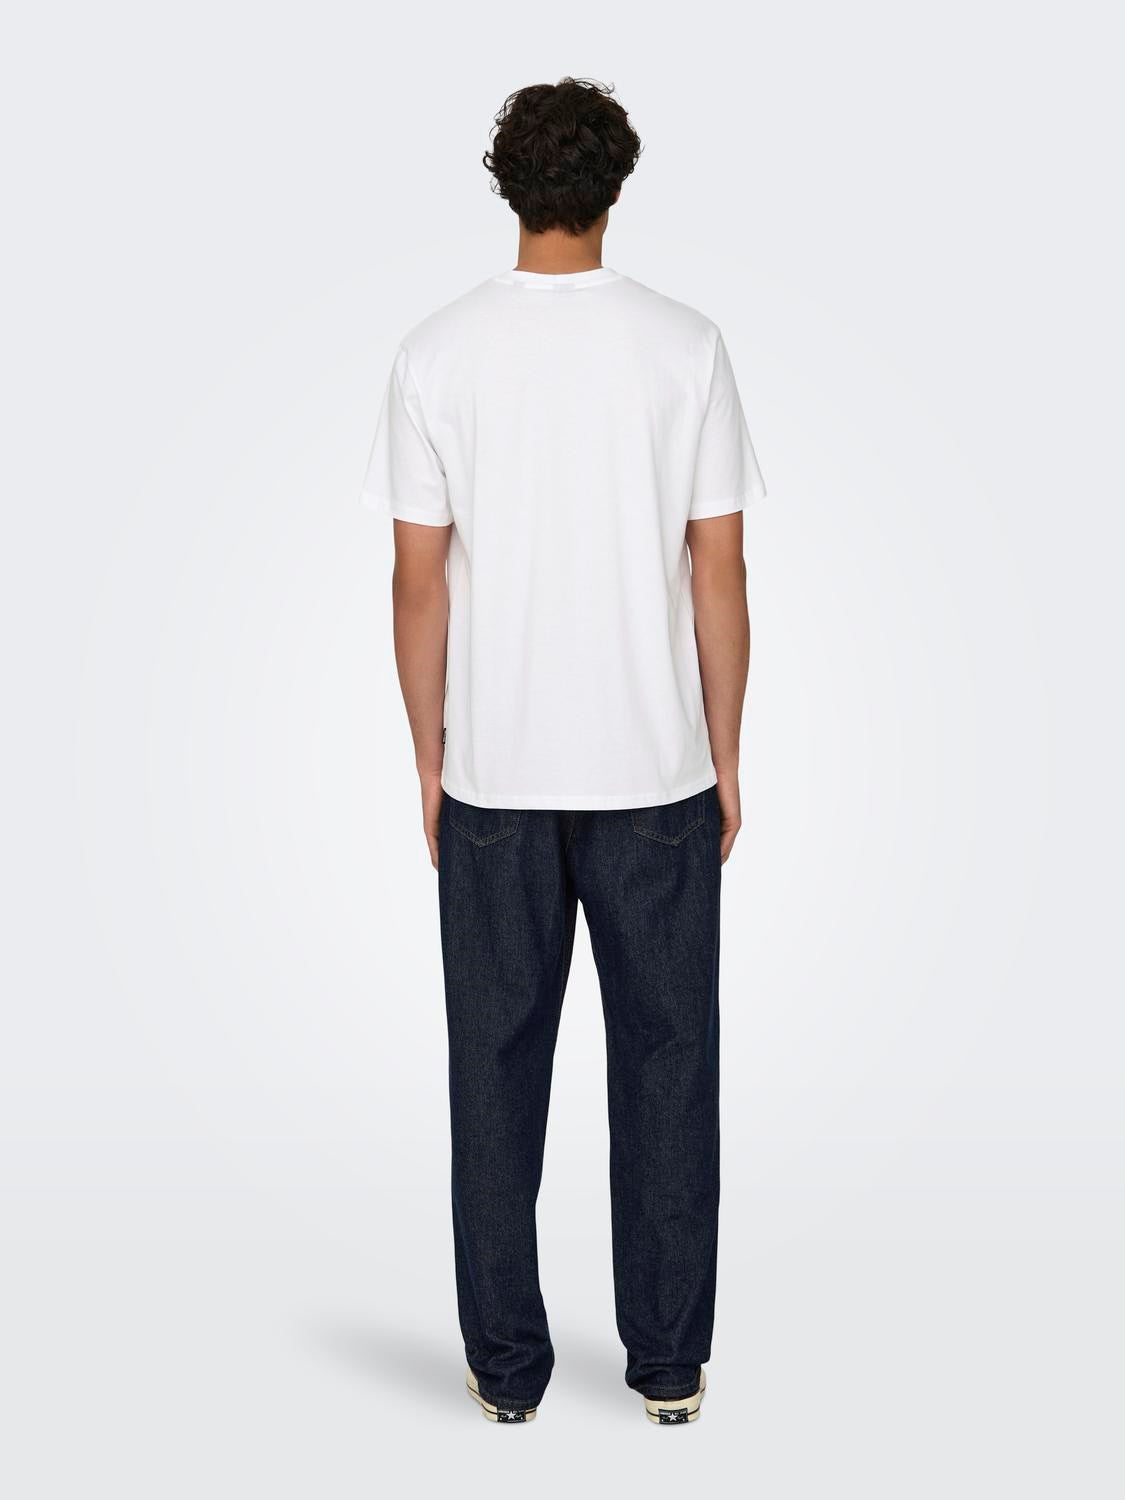 ONLY & SONS T-SHIRT 3D - col. bianco